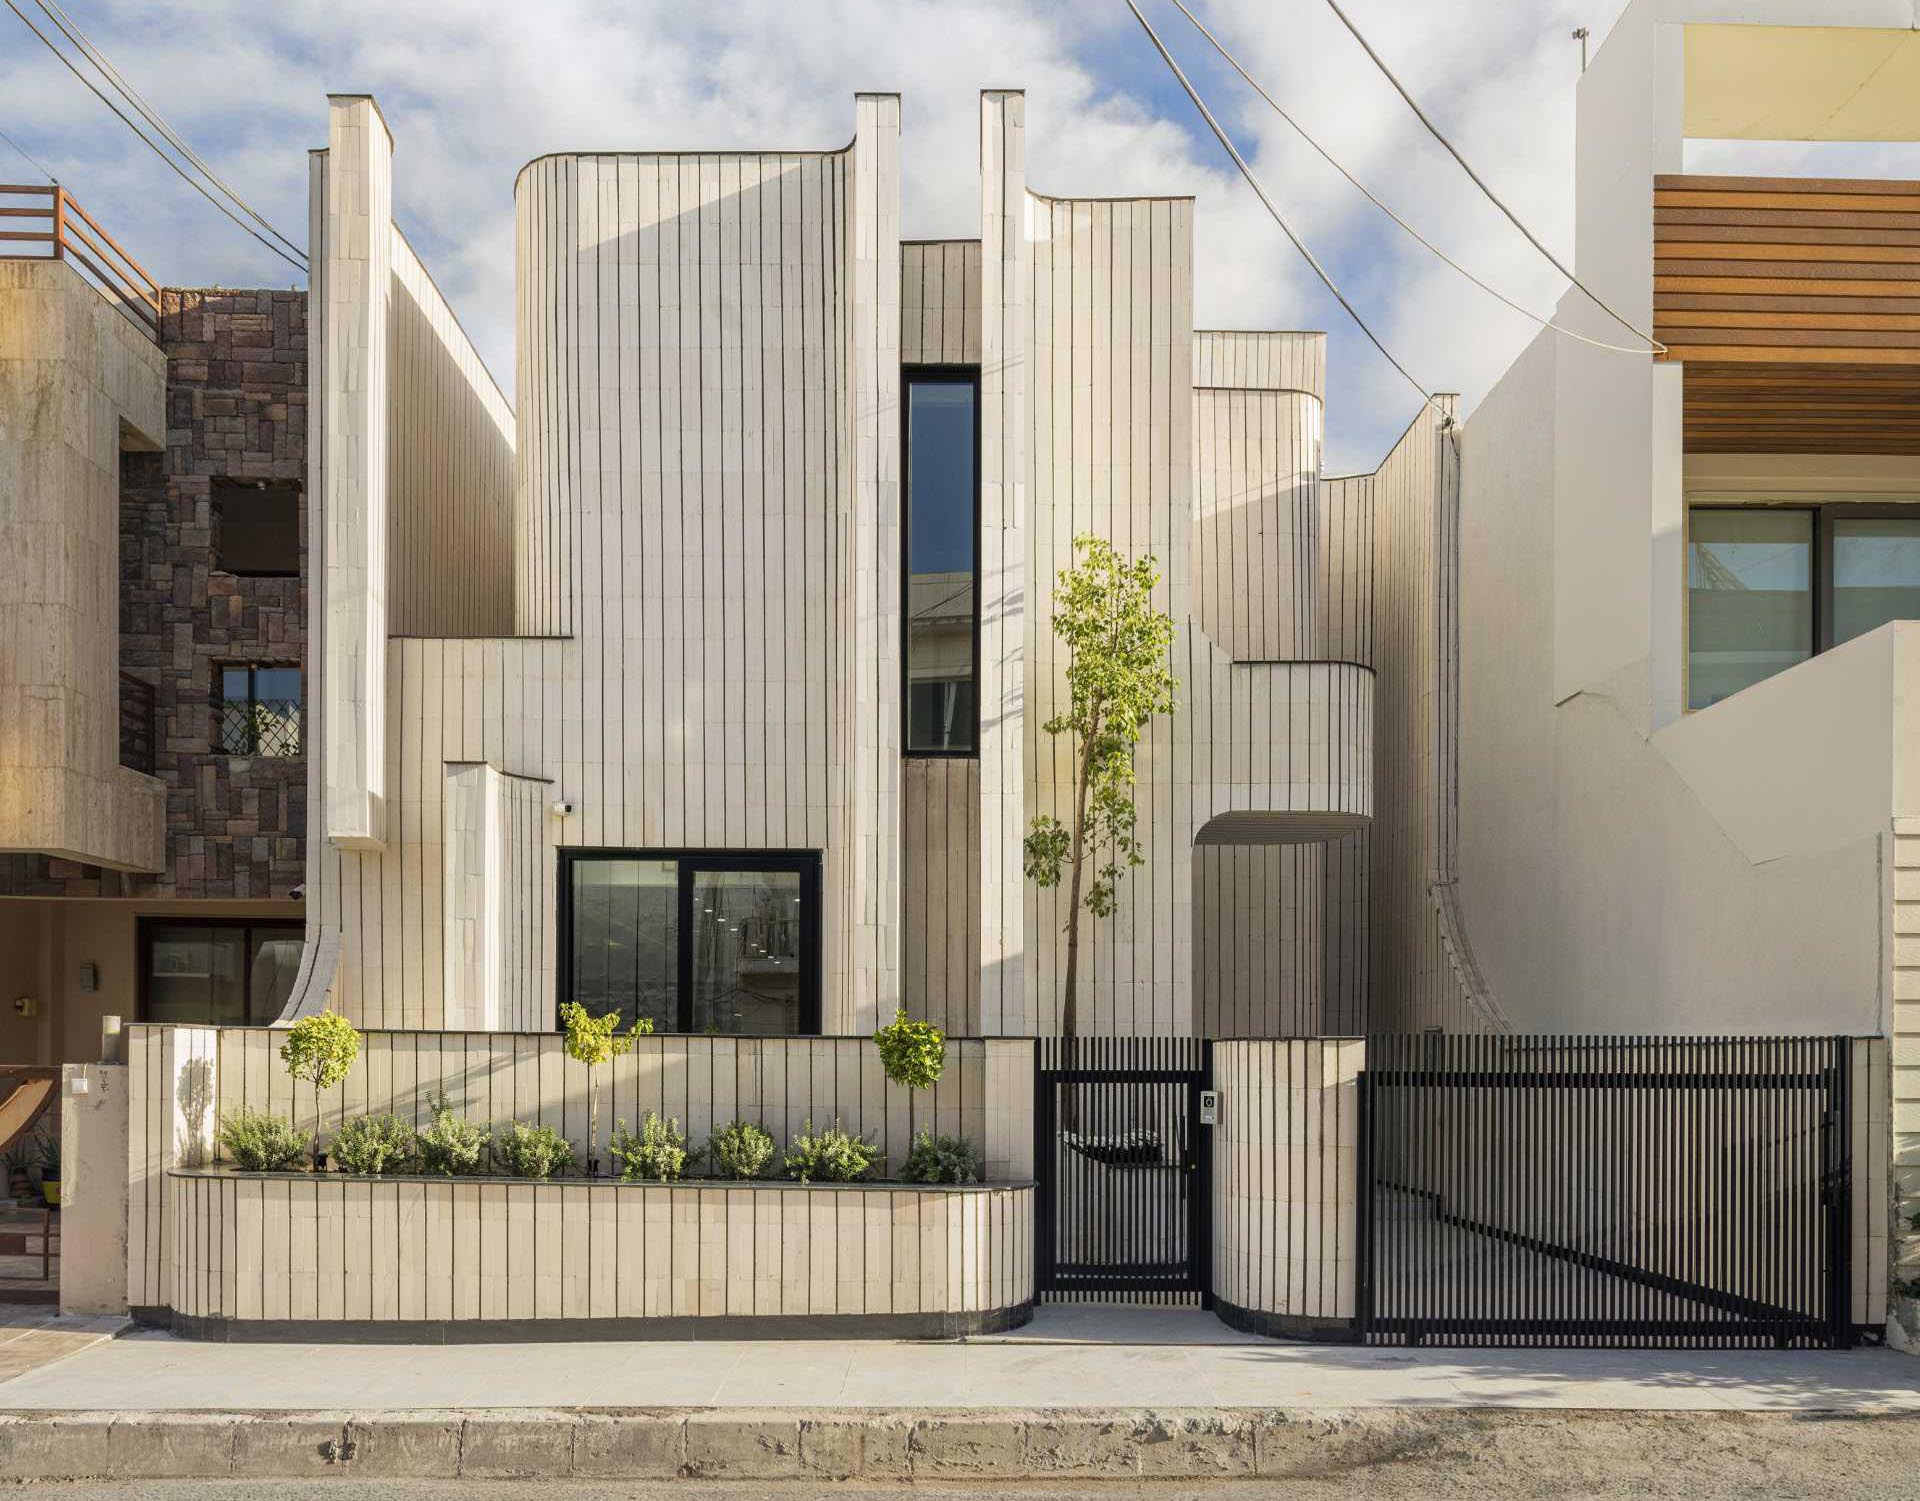 A modern and sculptural house covered in tiles, also has built-in planters.